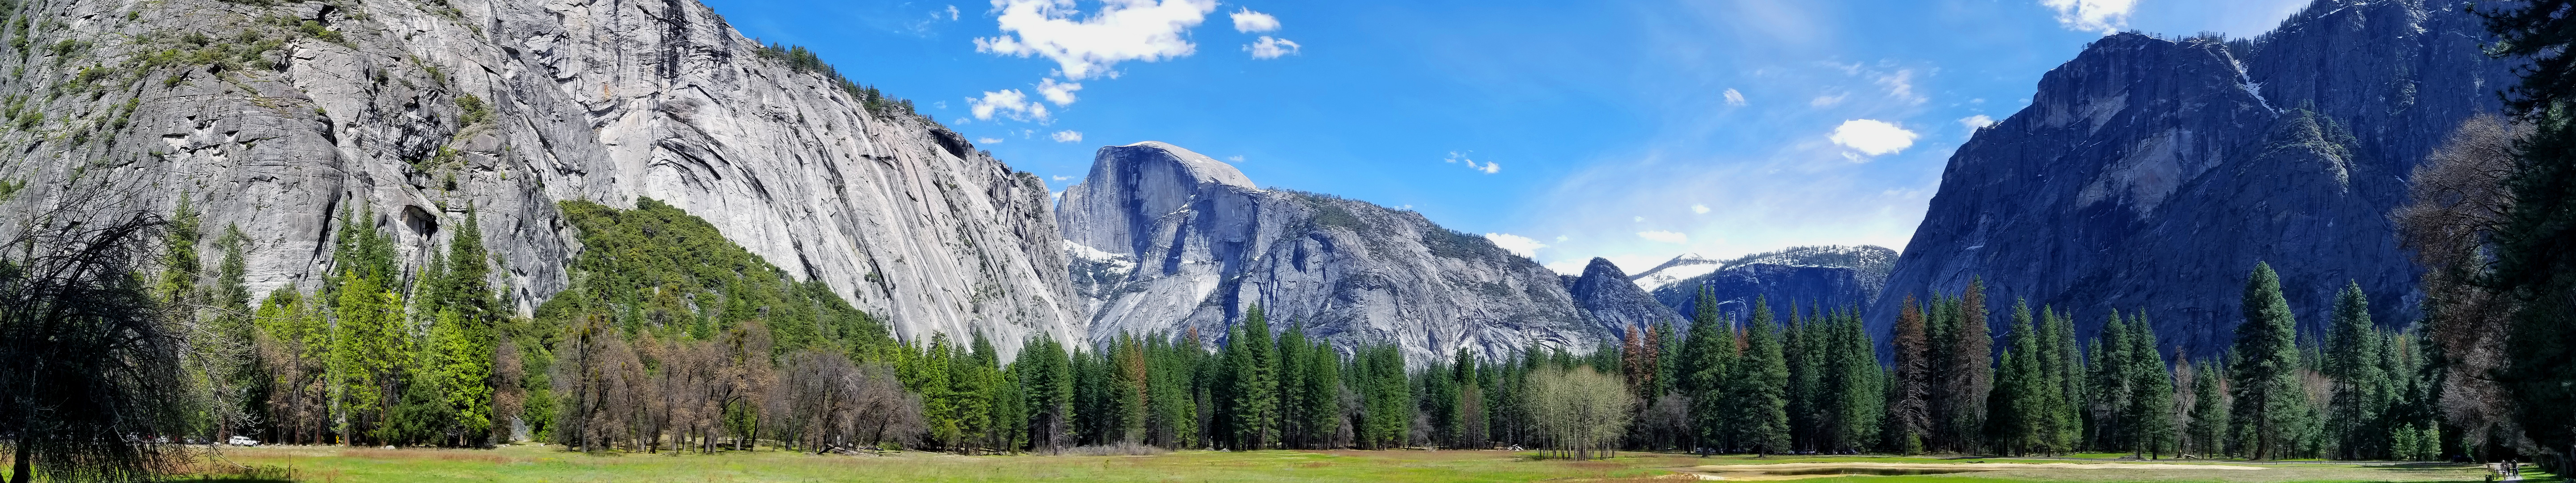 General 5760x1080 panorama triple screen multiple display nature photography Yosemite Valley Yosemite National Park Half Dome cliff mountains trees forest field USA California